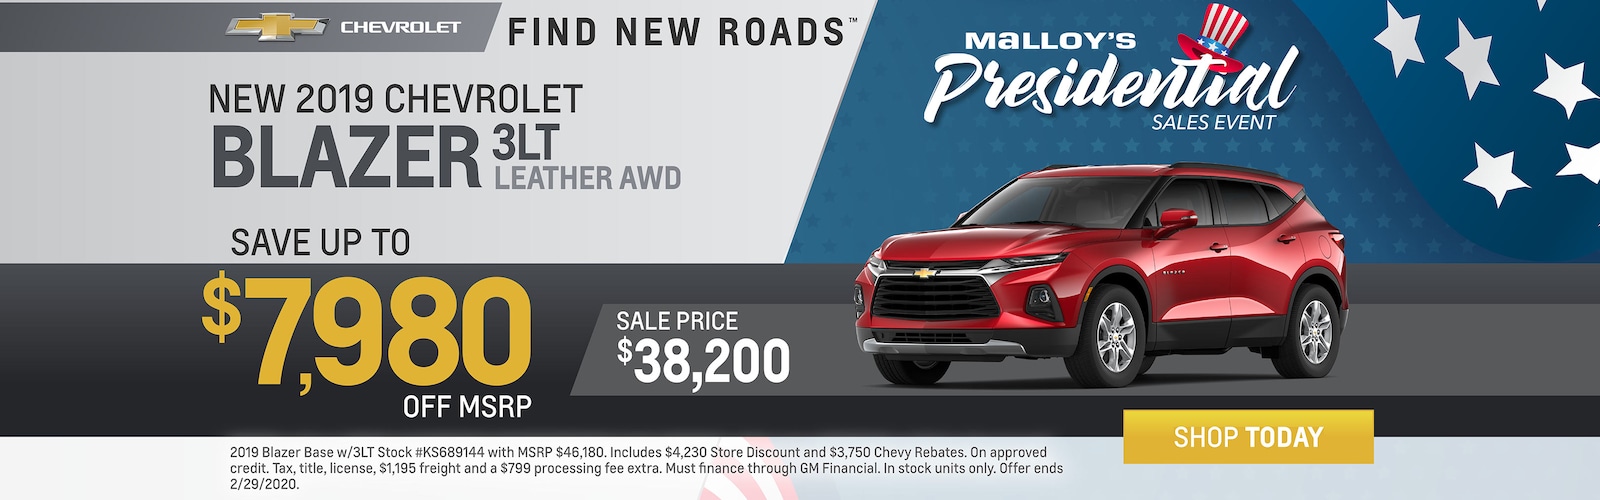 Local Chevrolet Dealership | Malloy Chevrolet, New and Used Chevy